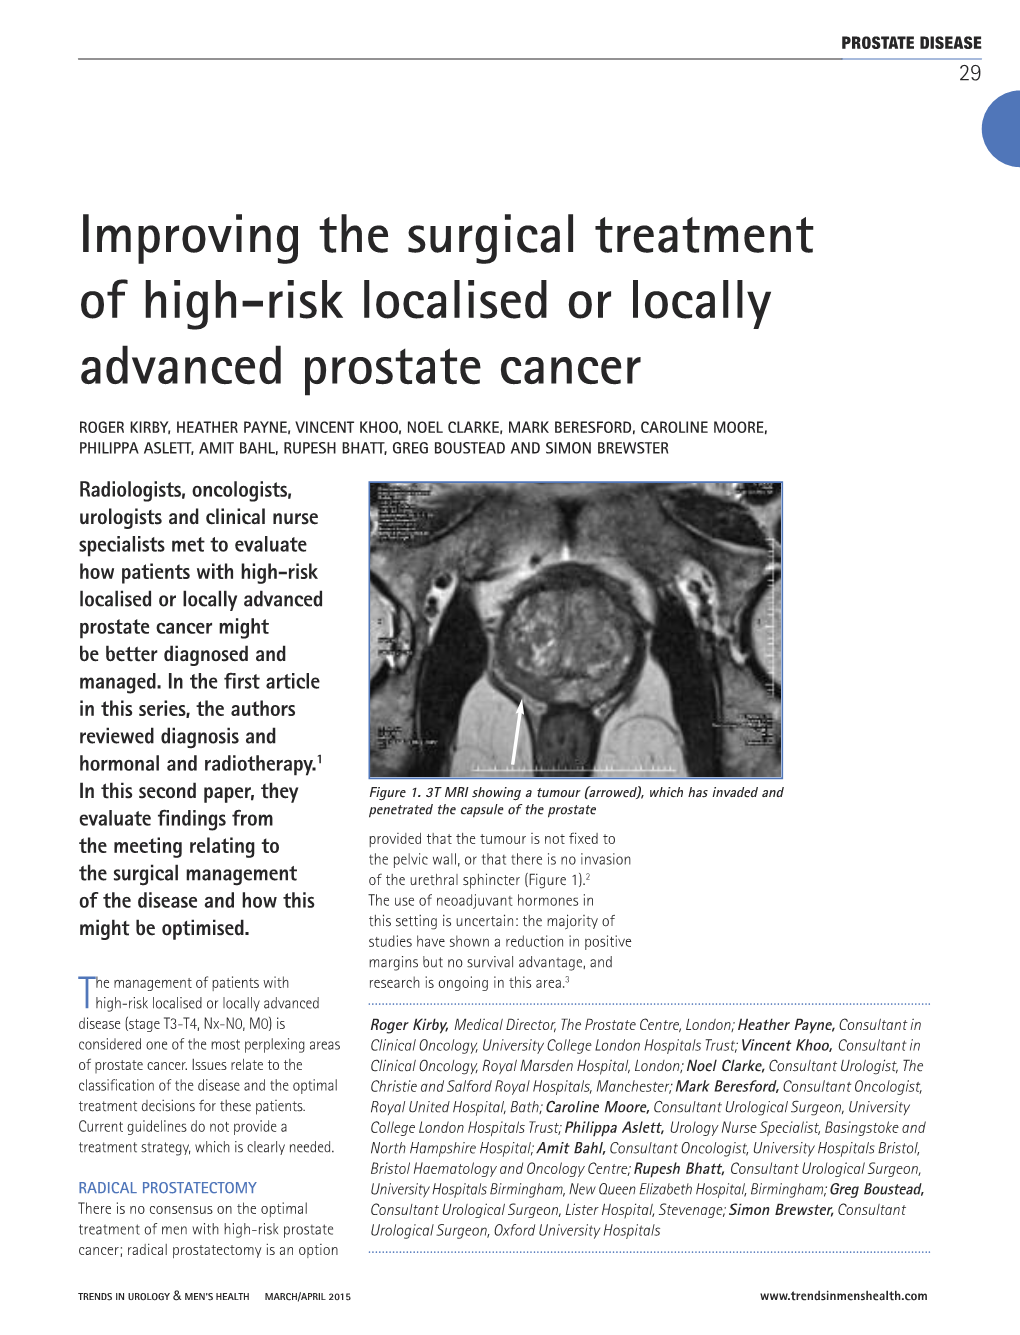 Improving the Surgical Treatment of High-Risk Localised Or Locally Advanced Prostate Cancer